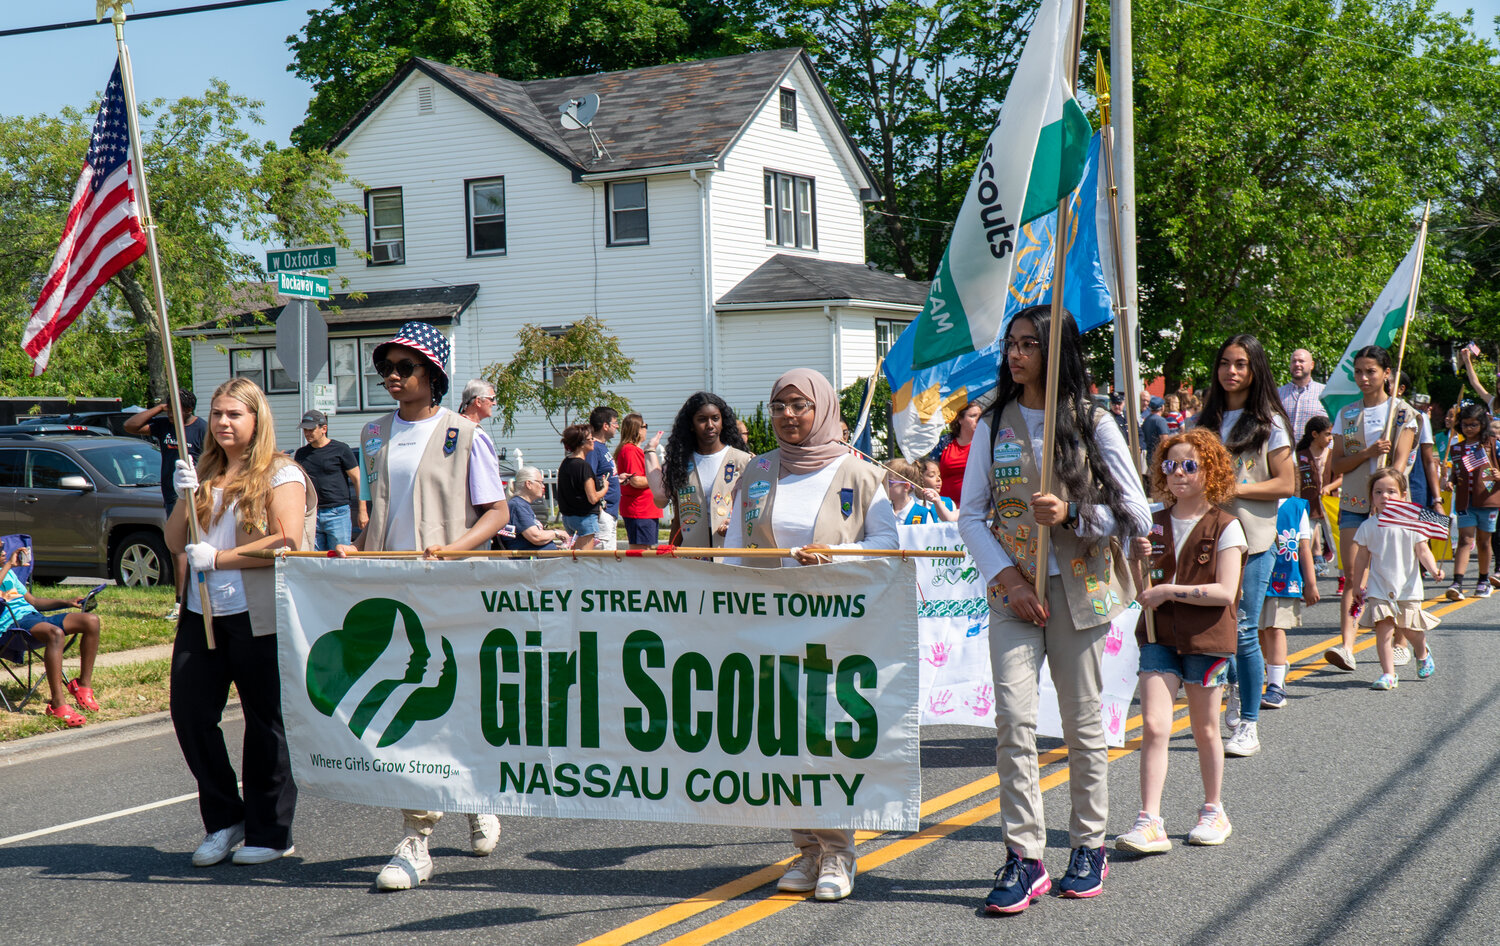 The Nassau County Girl Scouts honored fallen soldiers at the village’s annual Memorial Day parade on May 29.